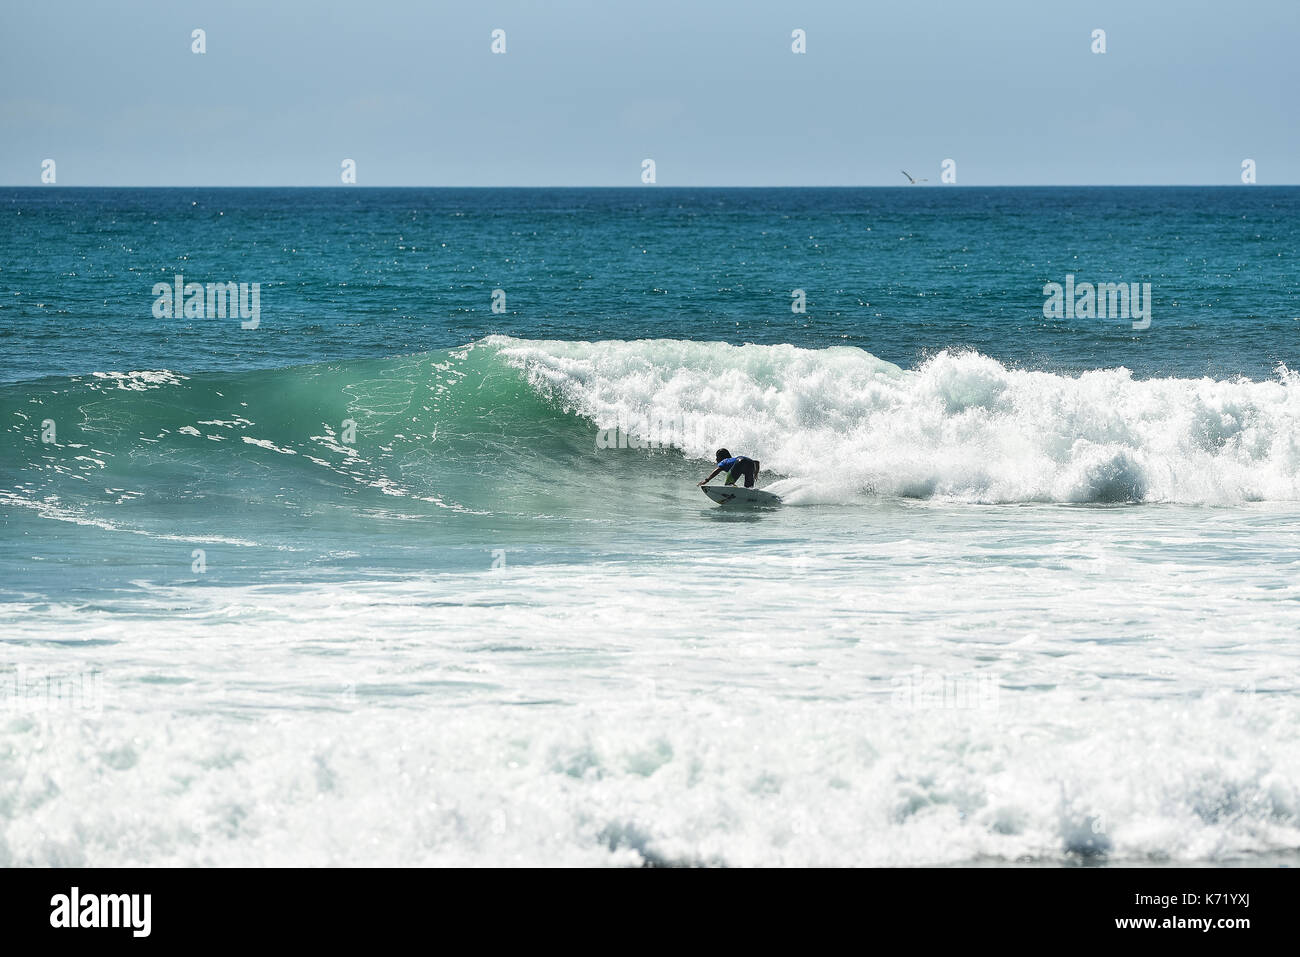 San Clemente, USA. 13 September, 2017.  Surfers compete head to head during the 2017 Hurley Pro surf contest at Lower Trestles, San Onofre State Park, CA. Surfer: Kanoa Igarashi (USA). Credit: Benjamin Ginsberg/Alamy Live News. Stock Photo